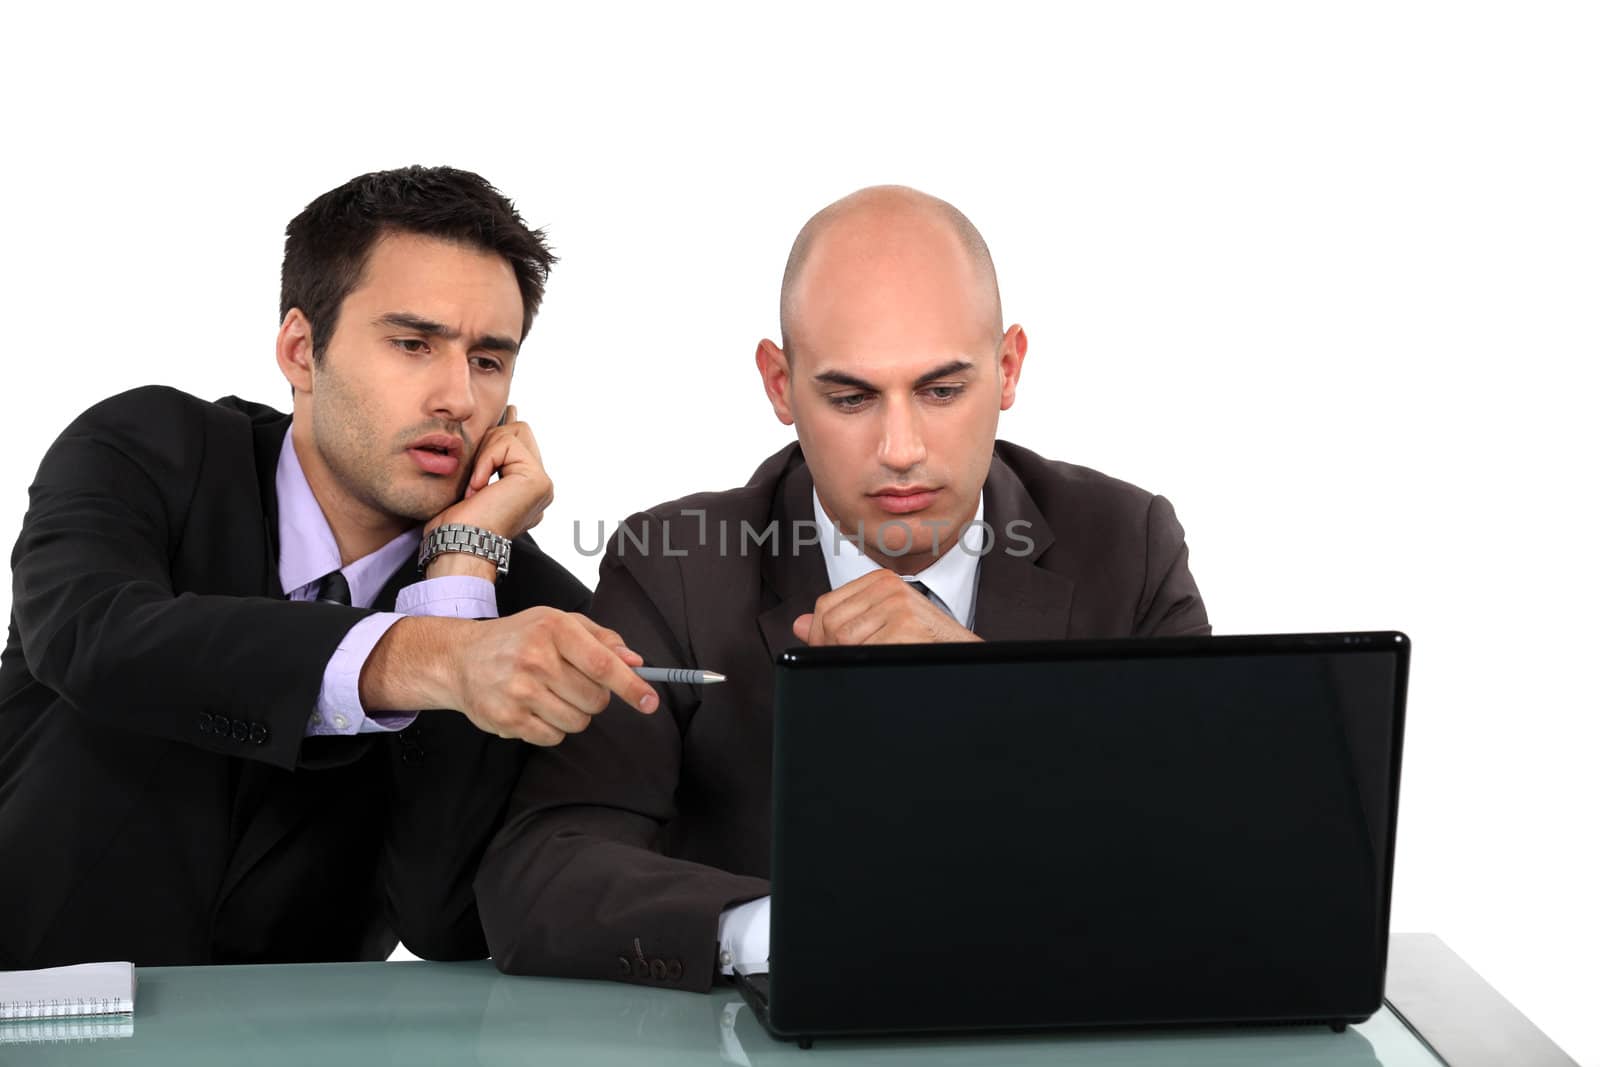 Executives discussing content on a laptop